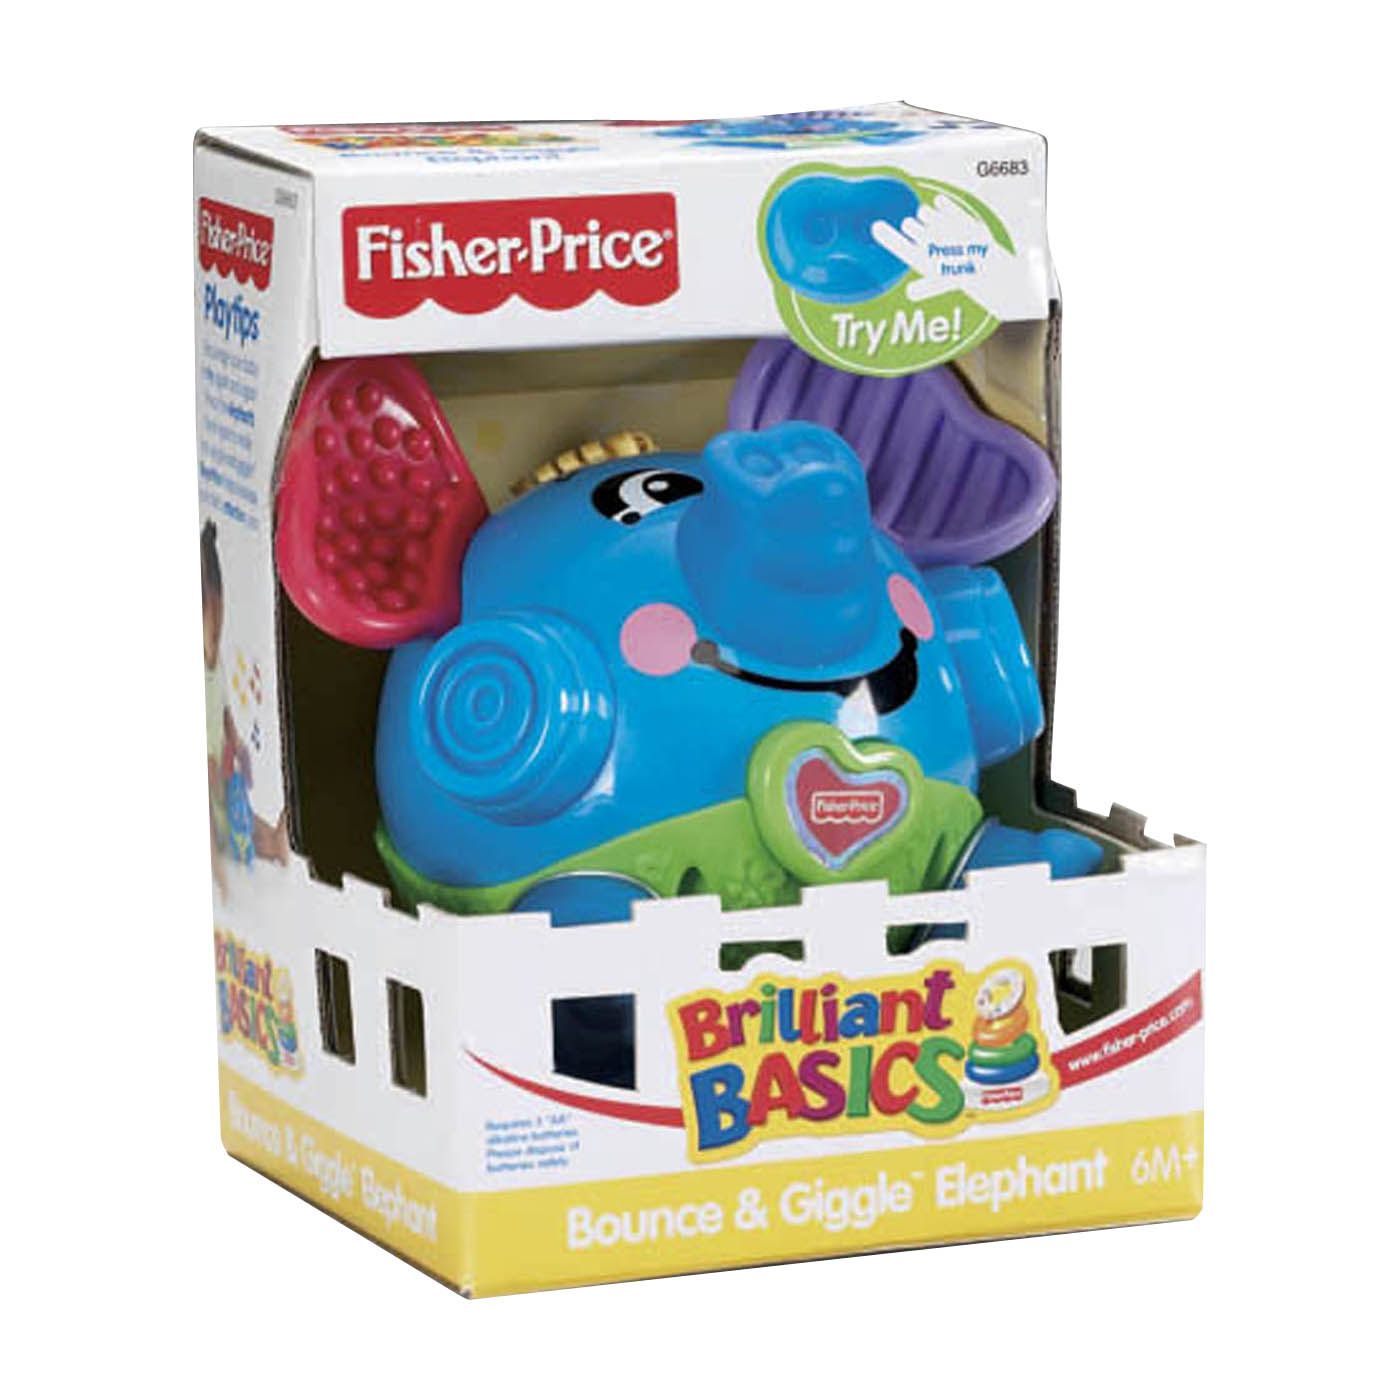 fisher price bounce and giggle elephant